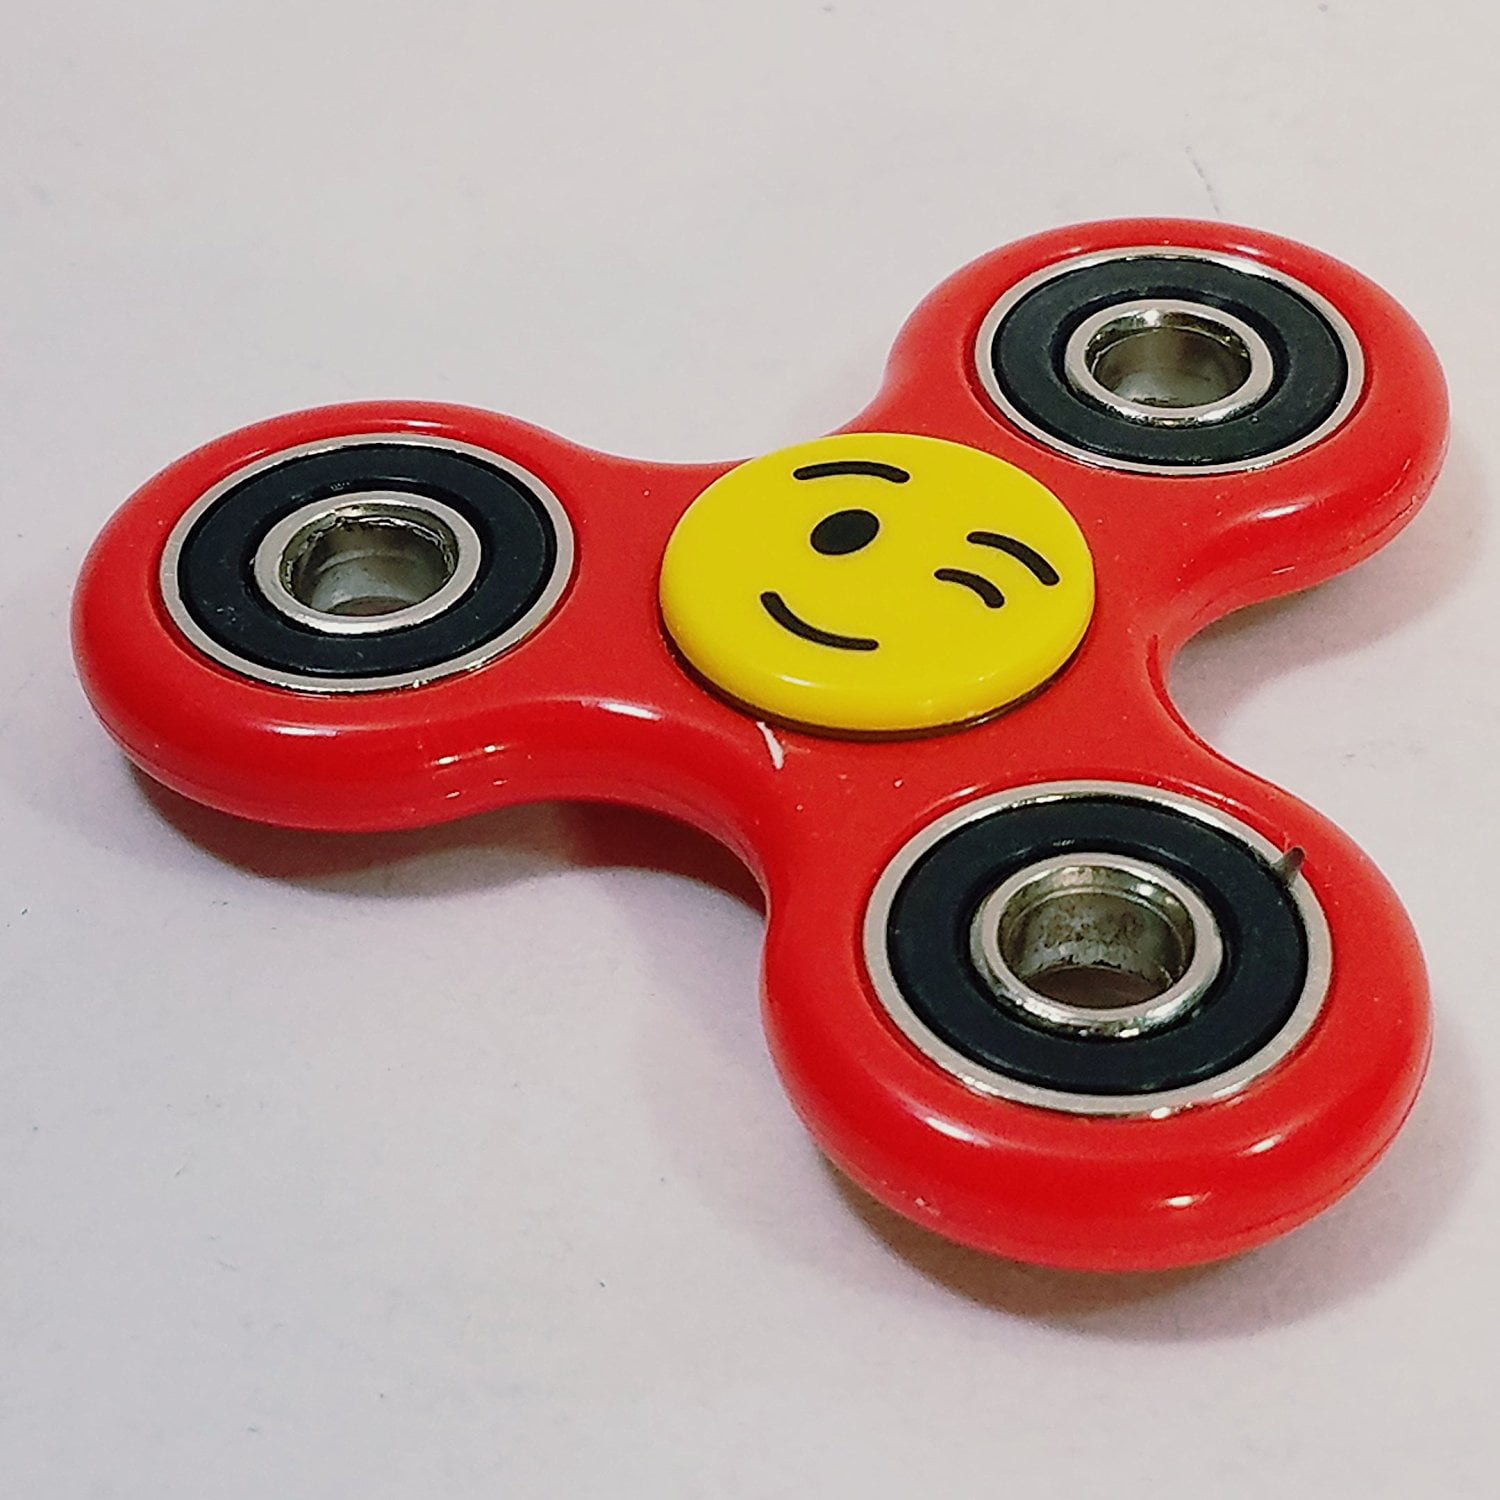 COLORFUL CERAMIC TRI SPINNING STRESS RELIEVERS FIDGET SPINNER 